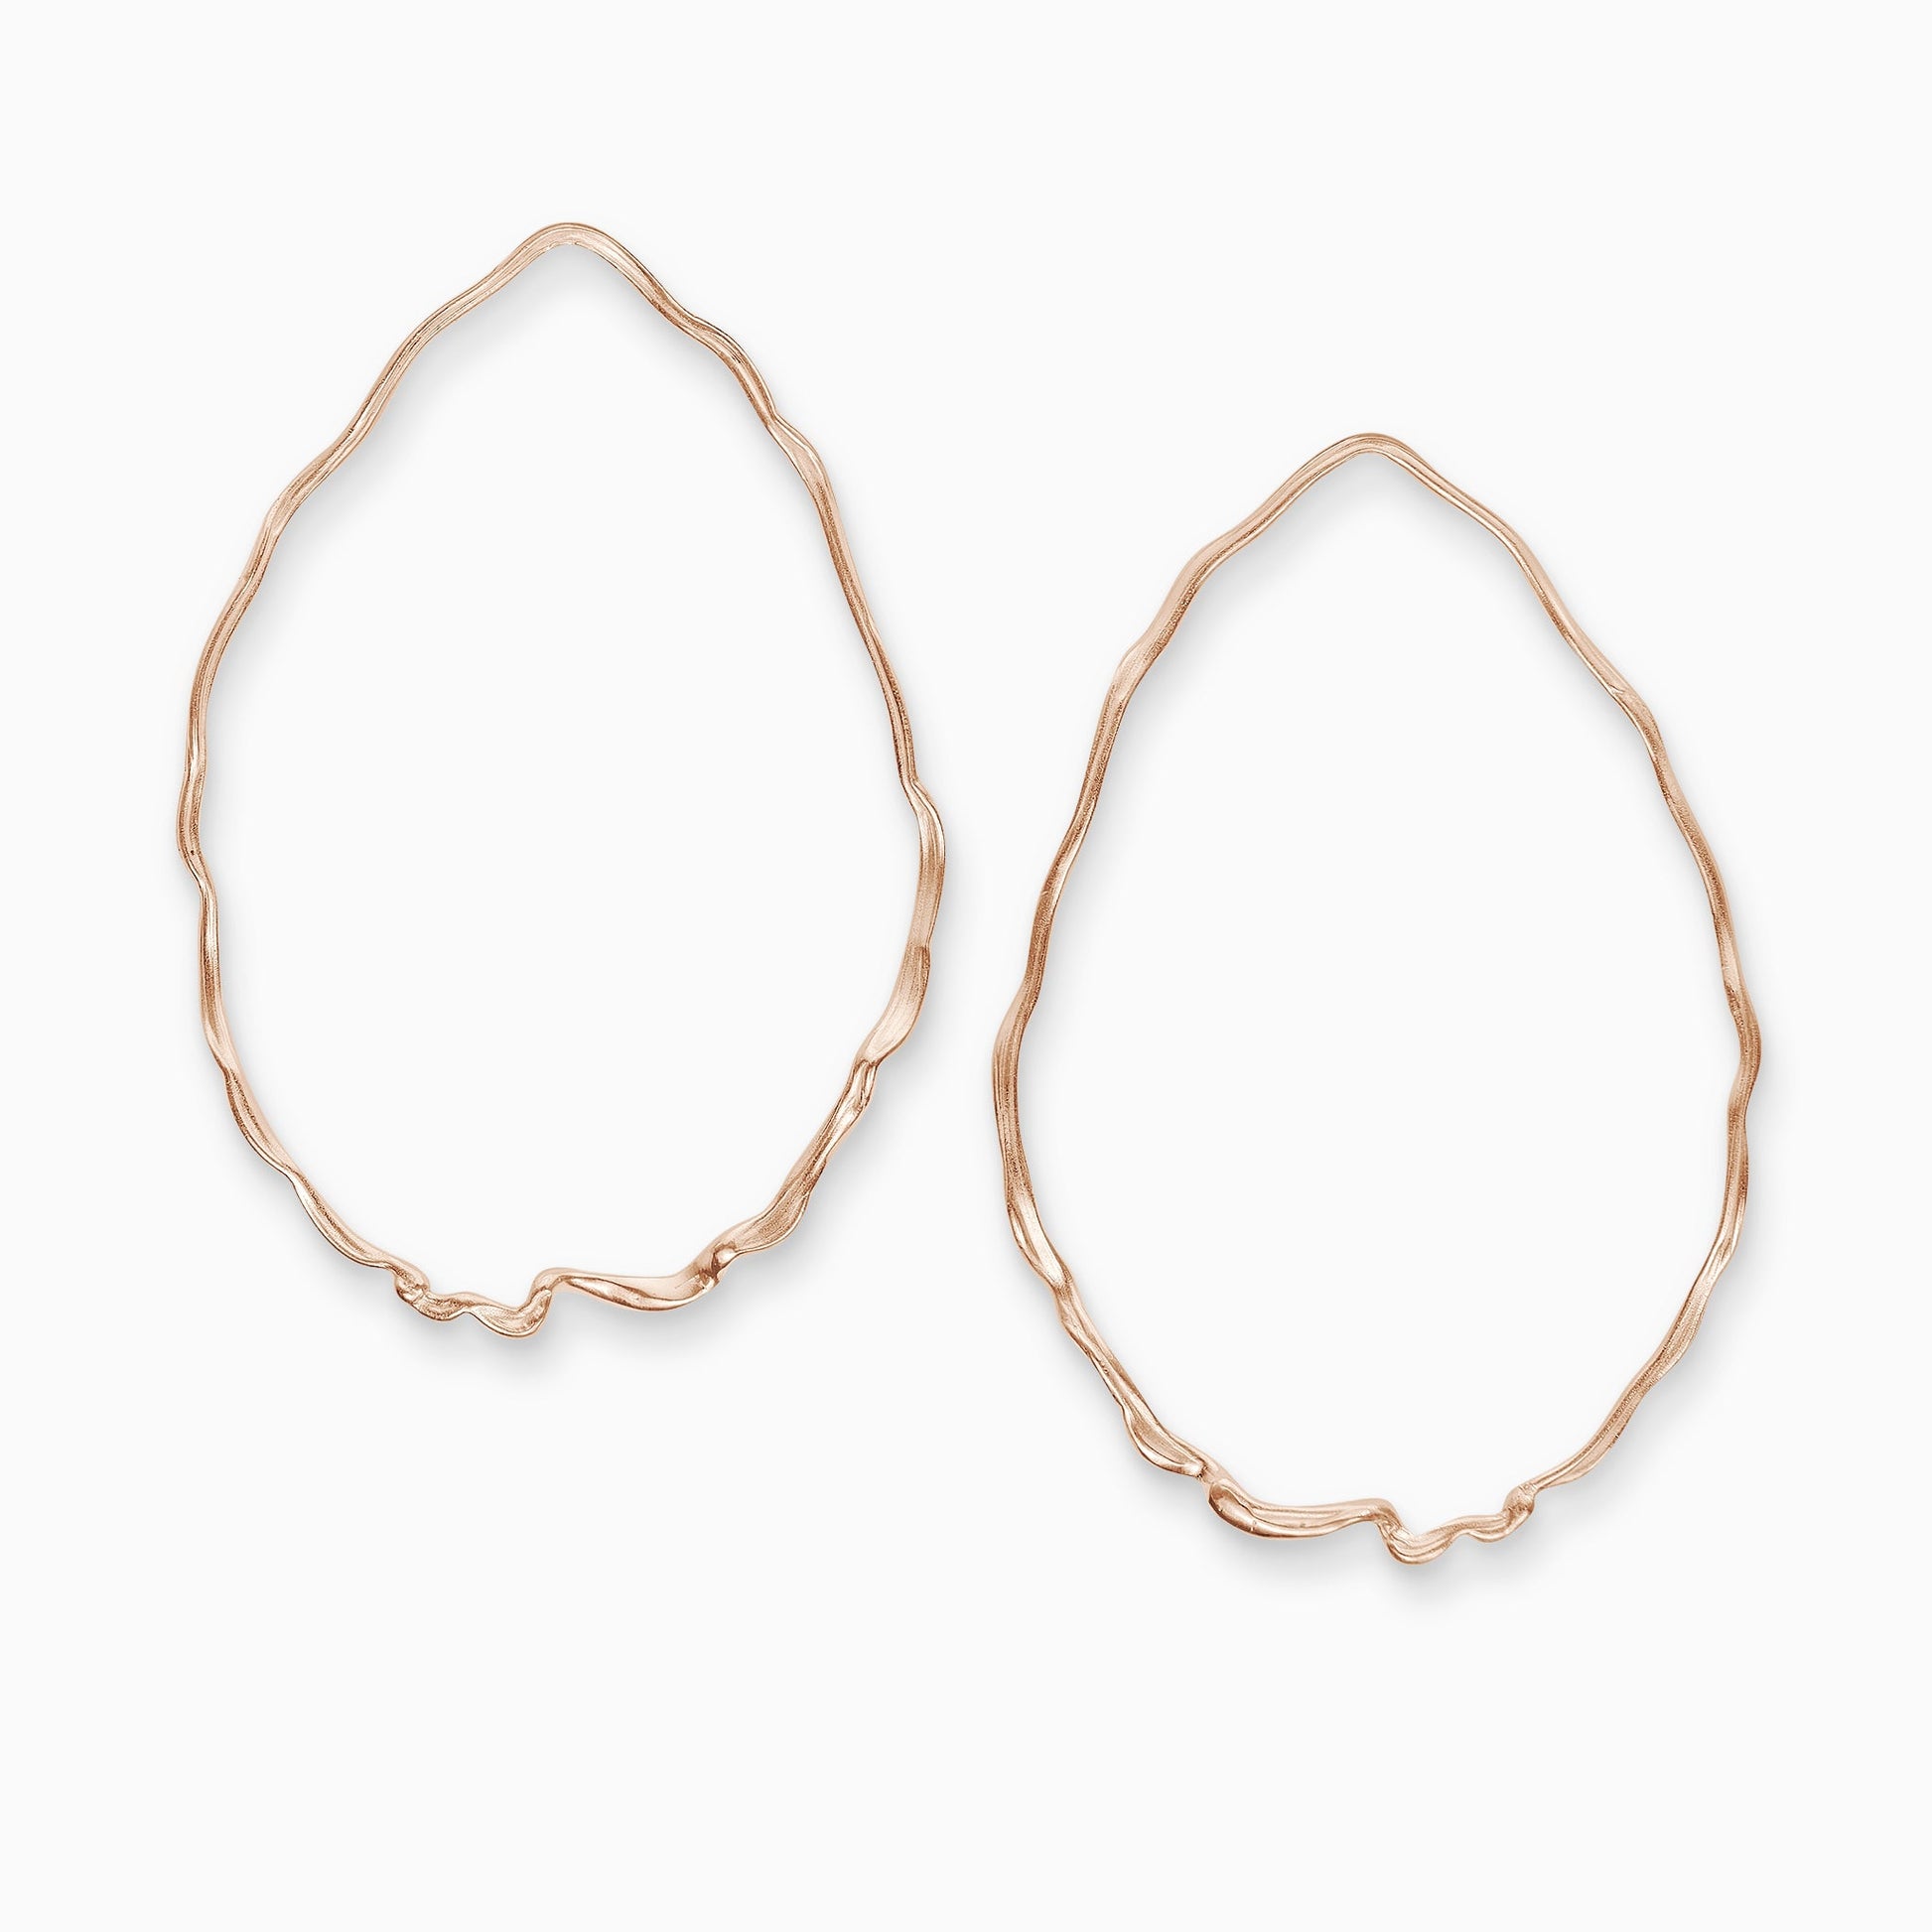 A pair of 18ct Fairtrade rose gold large teardrop shaped earrings with a stud fastening. A fine undulating irregular and organically textured wire forms the large teardrop shape. 75mm x 50mm